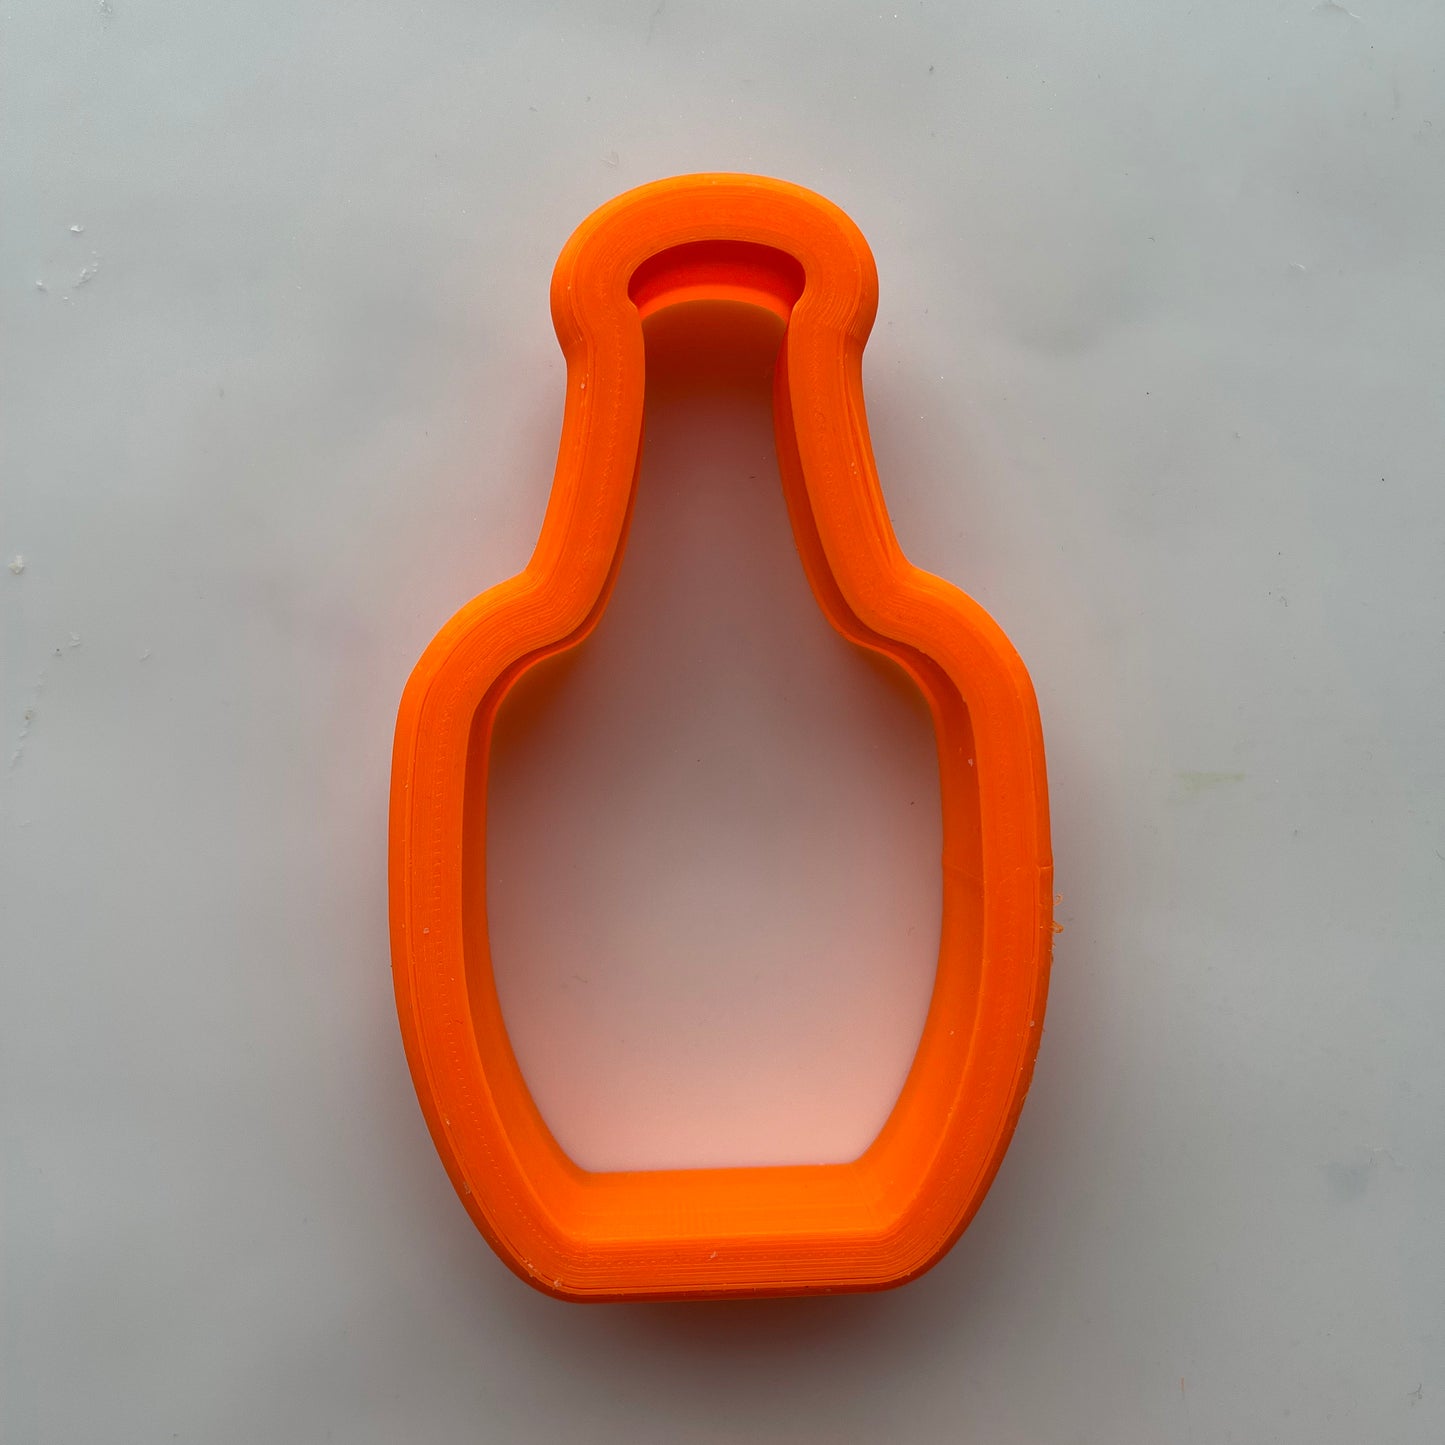 4 inch tall syrup cookie cutter